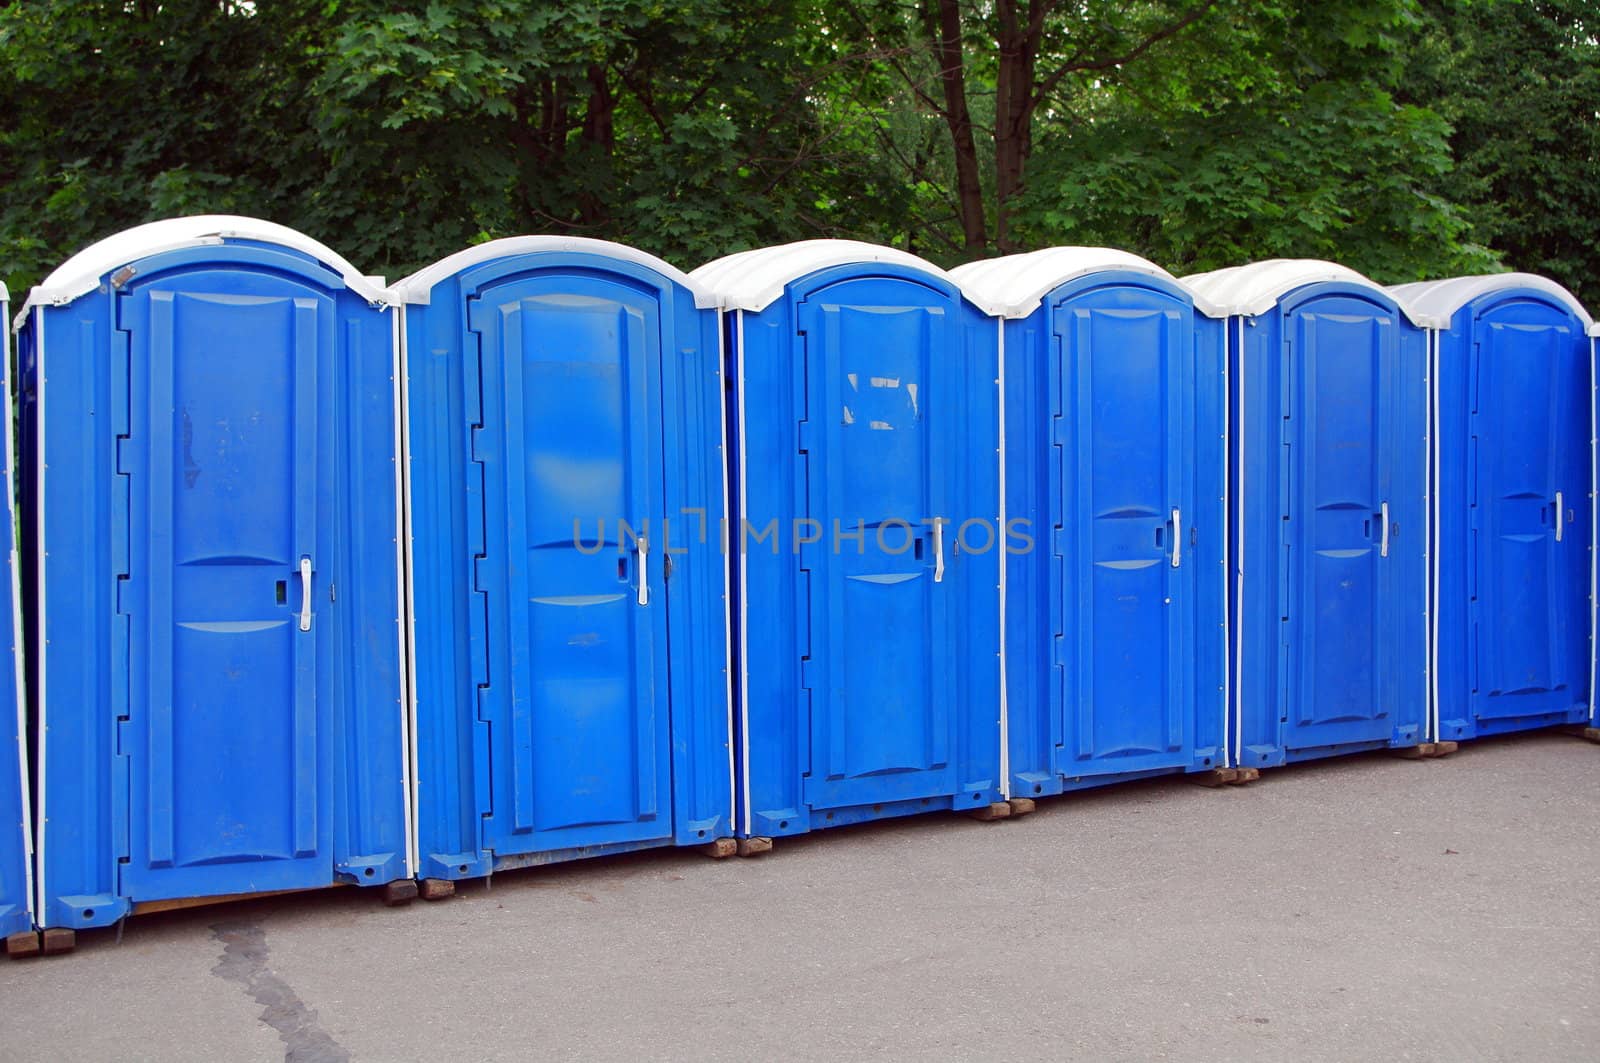 Row of blue public toilets in Moscow park by Stoyanov